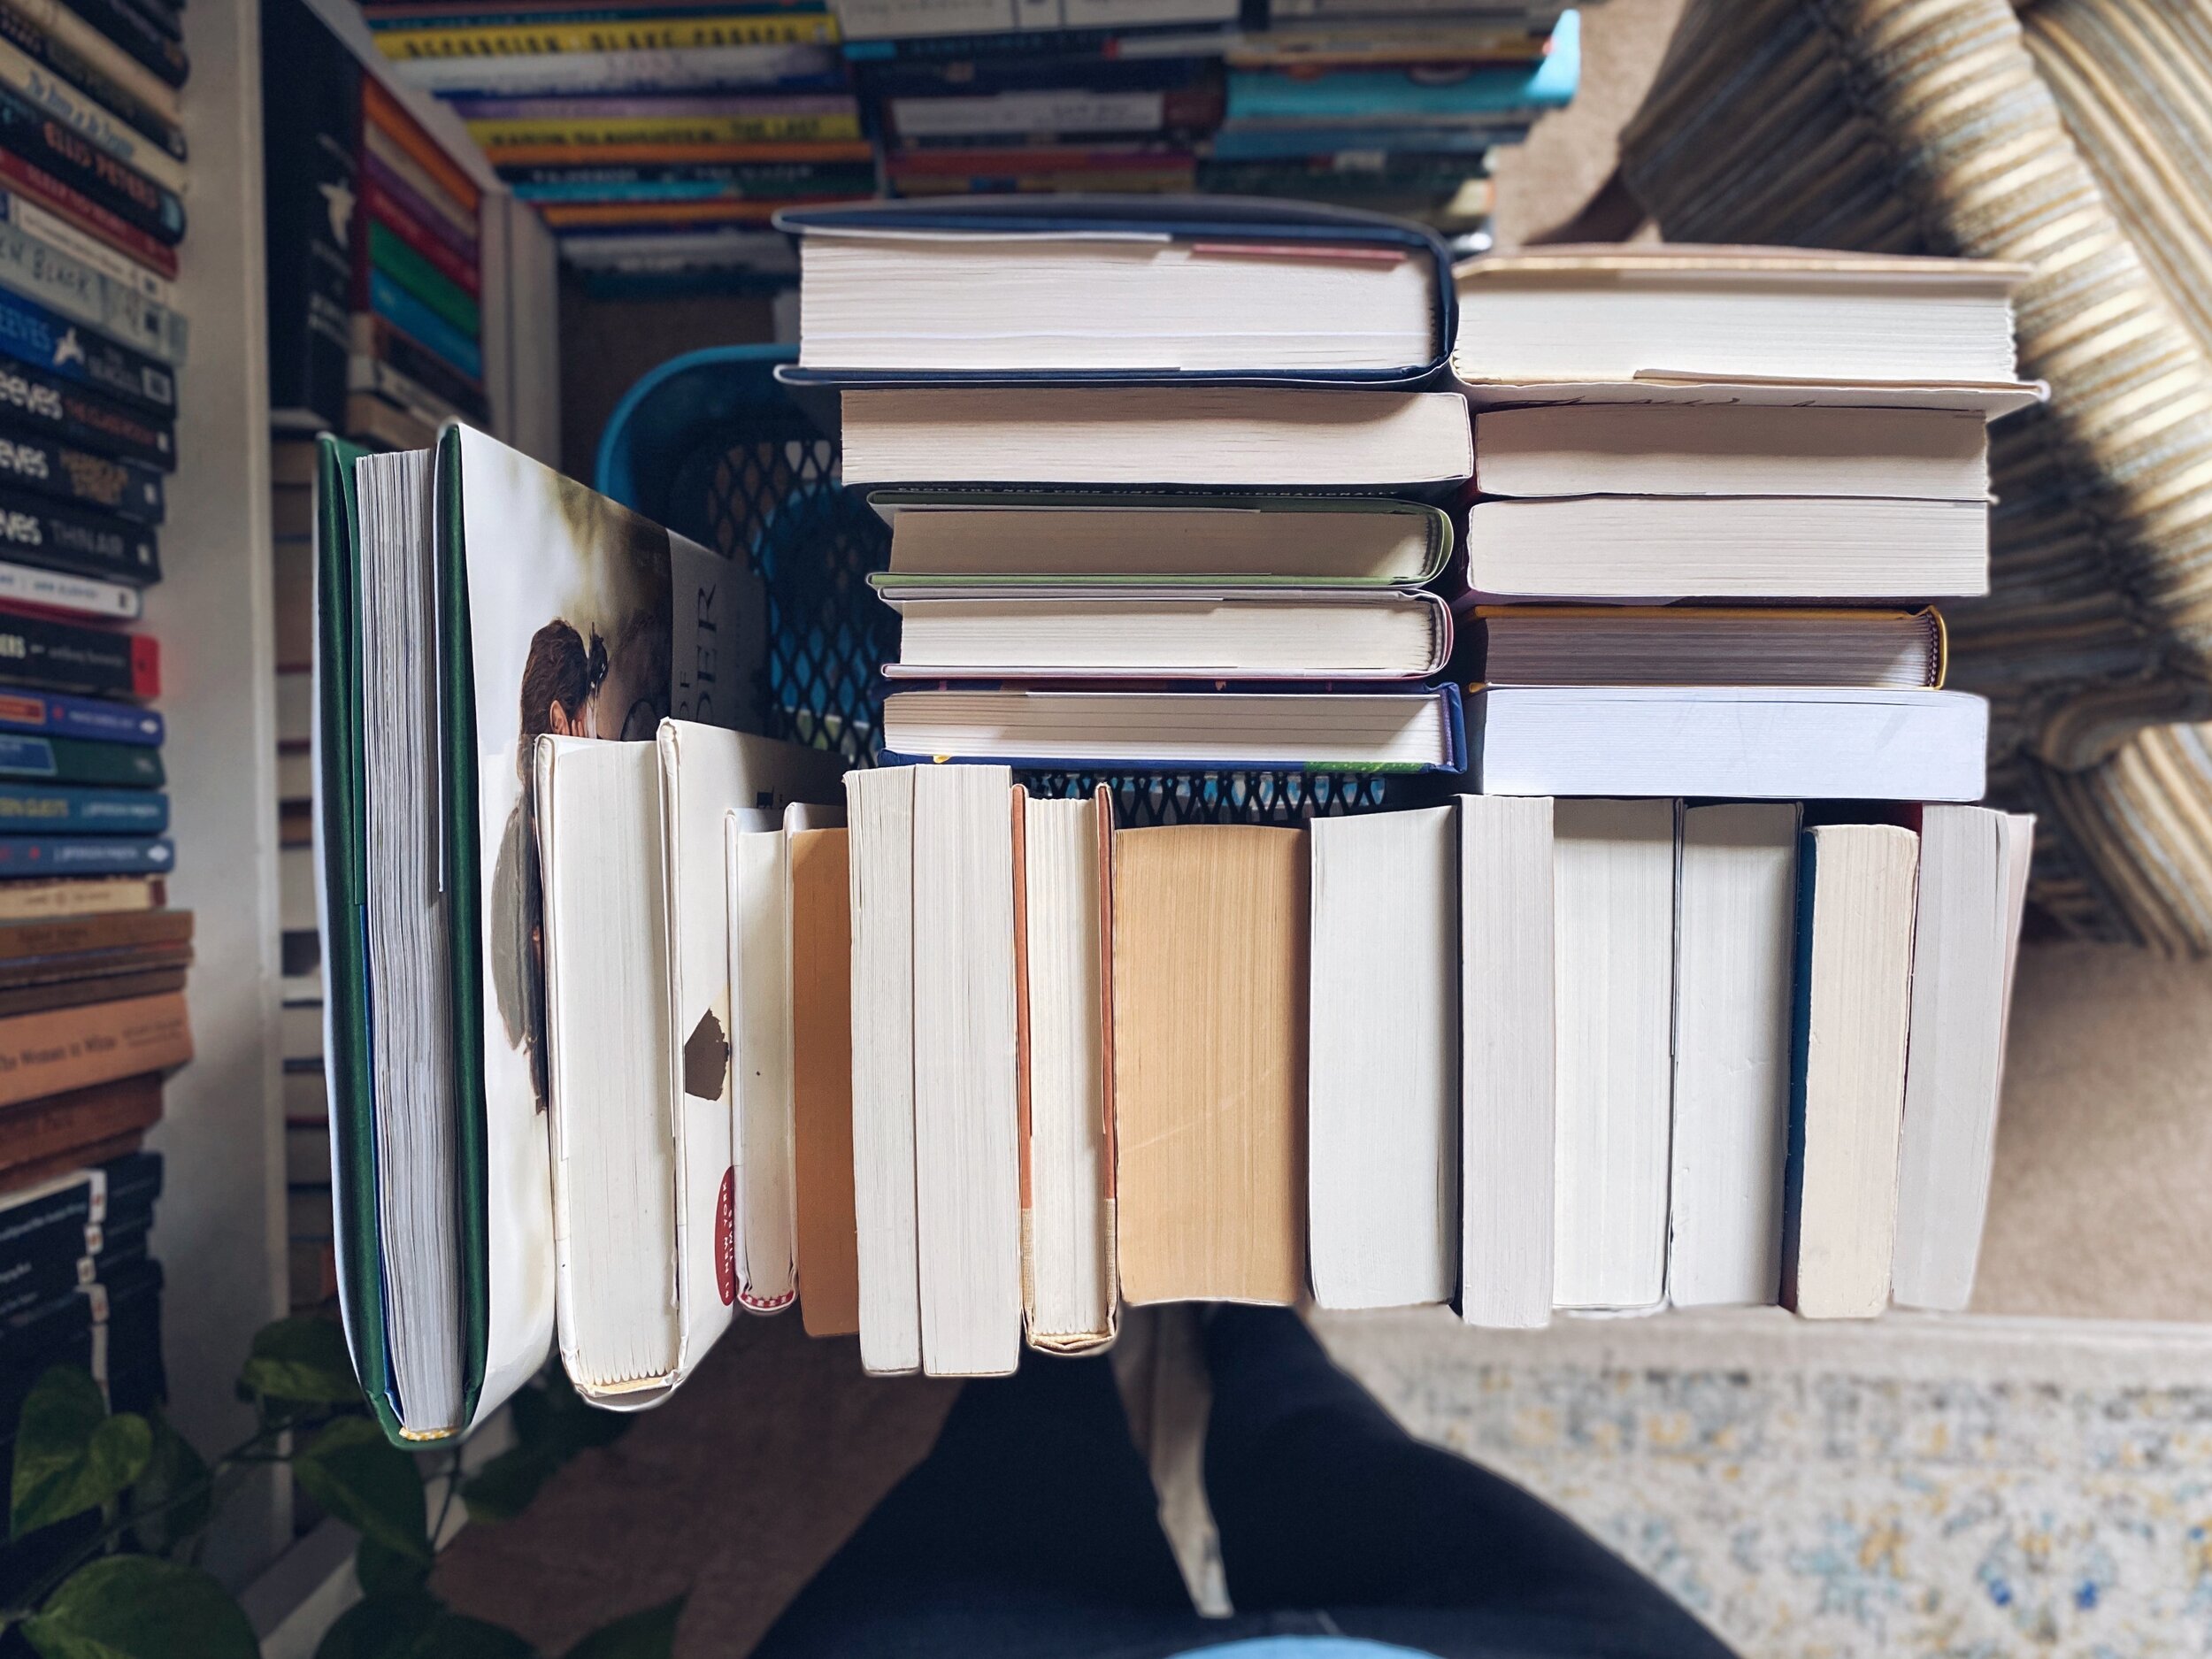 What I Read & Learned in January — The Unread Shelf